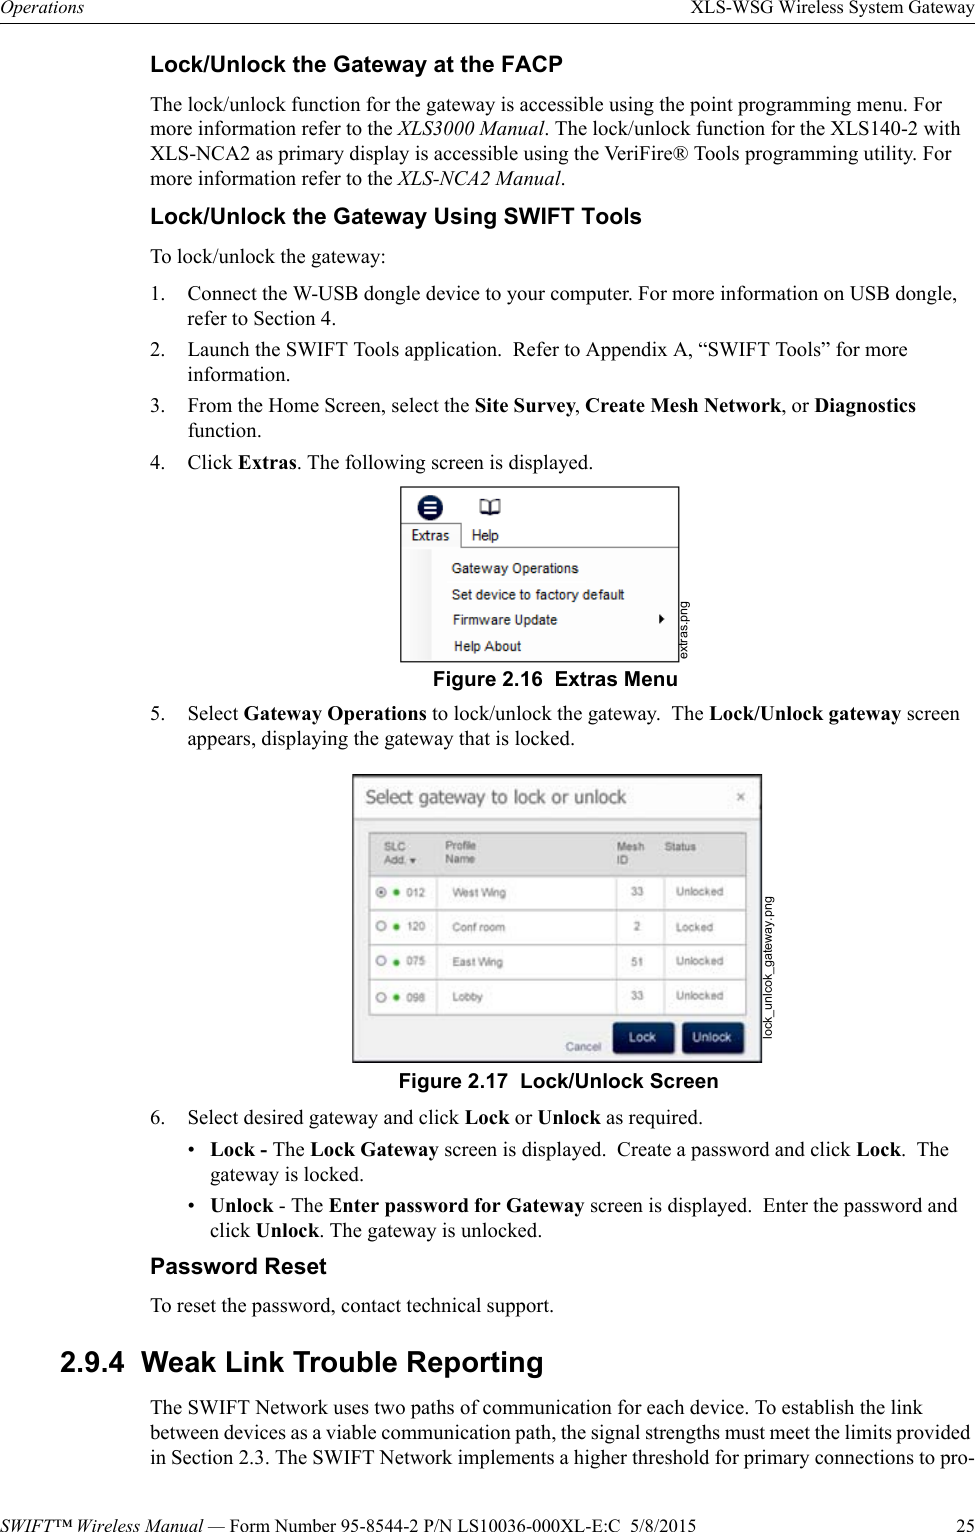 SWIFT™ Wireless Manual — Form Number 95-8544-2 P/N LS10036-000XL-E:C  5/8/2015  25Operations XLS-WSG Wireless System GatewayLock/Unlock the Gateway at the FACPThe lock/unlock function for the gateway is accessible using the point programming menu. For more information refer to the XLS3000 Manual. The lock/unlock function for the XLS140-2 with XLS-NCA2 as primary display is accessible using the VeriFire® Tools programming utility. For more information refer to the XLS-NCA2 Manual. Lock/Unlock the Gateway Using SWIFT ToolsTo lock/unlock the gateway:1. Connect the W-USB dongle device to your computer. For more information on USB dongle, refer to Section 4.2. Launch the SWIFT Tools application.  Refer to Appendix A, “SWIFT Tools” for more information.3. From the Home Screen, select the Site Survey, Create Mesh Network, or Diagnostics function.4. Click Extras. The following screen is displayed. 5. Select Gateway Operations to lock/unlock the gateway.  The Lock/Unlock gateway screen appears, displaying the gateway that is locked. 6. Select desired gateway and click Lock or Unlock as required.•Lock - The Lock Gateway screen is displayed.  Create a password and click Lock.  The gateway is locked.•Unlock - The Enter password for Gateway screen is displayed.  Enter the password and click Unlock. The gateway is unlocked.Password ResetTo reset the password, contact technical support.2.9.4  Weak Link Trouble ReportingThe SWIFT Network uses two paths of communication for each device. To establish the link between devices as a viable communication path, the signal strengths must meet the limits provided in Section 2.3. The SWIFT Network implements a higher threshold for primary connections to pro-extras.pngFigure 2.16  Extras Menulock_unlcok_gateway.pngFigure 2.17  Lock/Unlock Screen